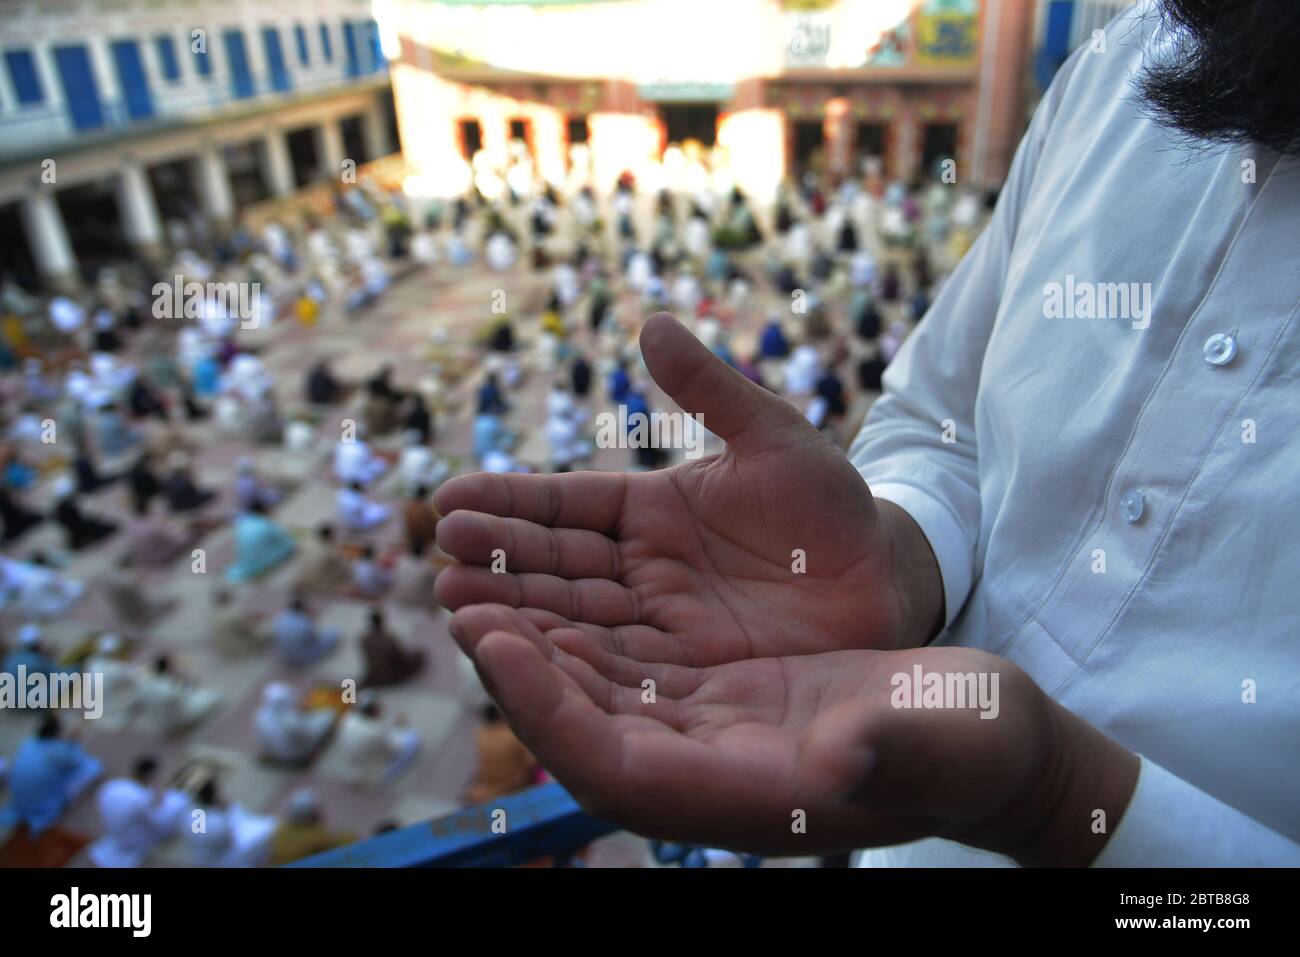 Pakistani faithful Muslims offer Eid al-Fitr prayers at Jamia Naeemia Mosque with SOP's after the government relaxed a weeks-long lockdown that was enforced to help curb the spread of the coronavirus in Lahore. Muslims around the world began marking a sombre Eid al-Fitr on May 24, the end of the fasting month of Ramadan' many under coronavirus lockdown, but lax restrictions offer respite to worshipers in some countries despite fears of skyrocketing infections.a usually joyous three-day celebration that has been significantly toned down as coronavirus cases soar. (Photo by Rana Sajid Hussain/Pa Stock Photo